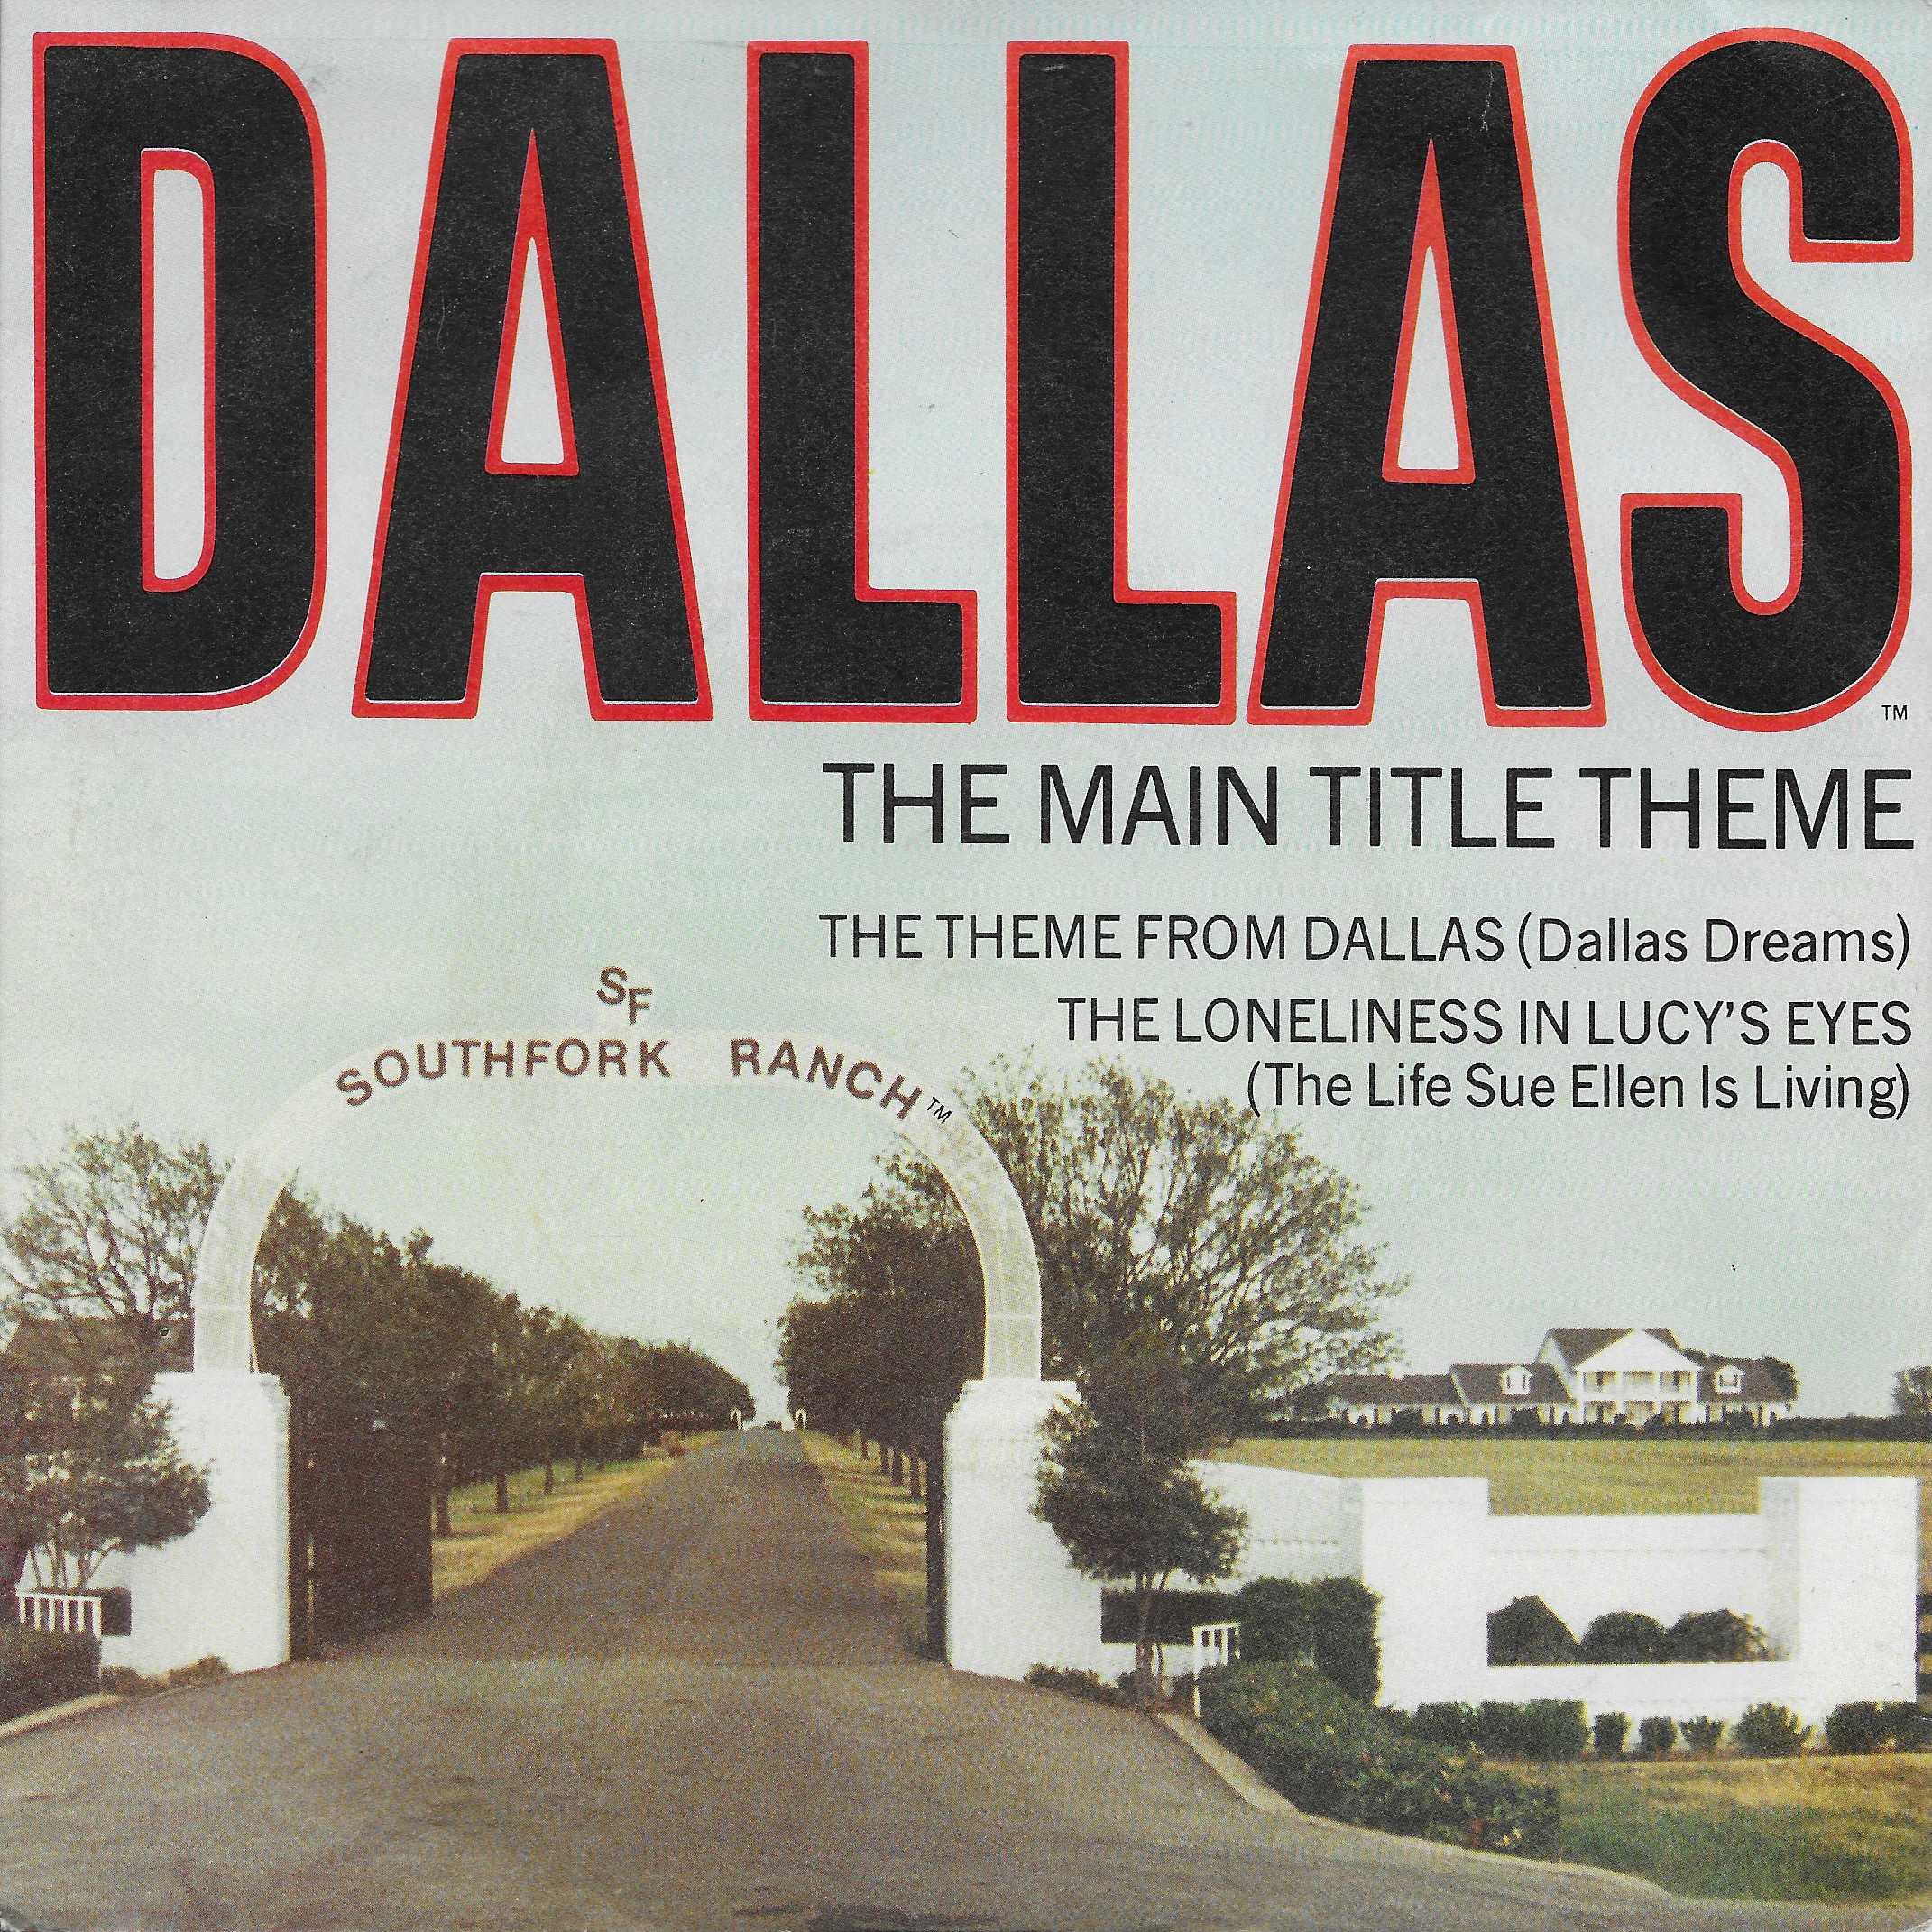 Picture of Dallas dreams (Dallas) by artist Jerrold Immel from the BBC singles - Records and Tapes library